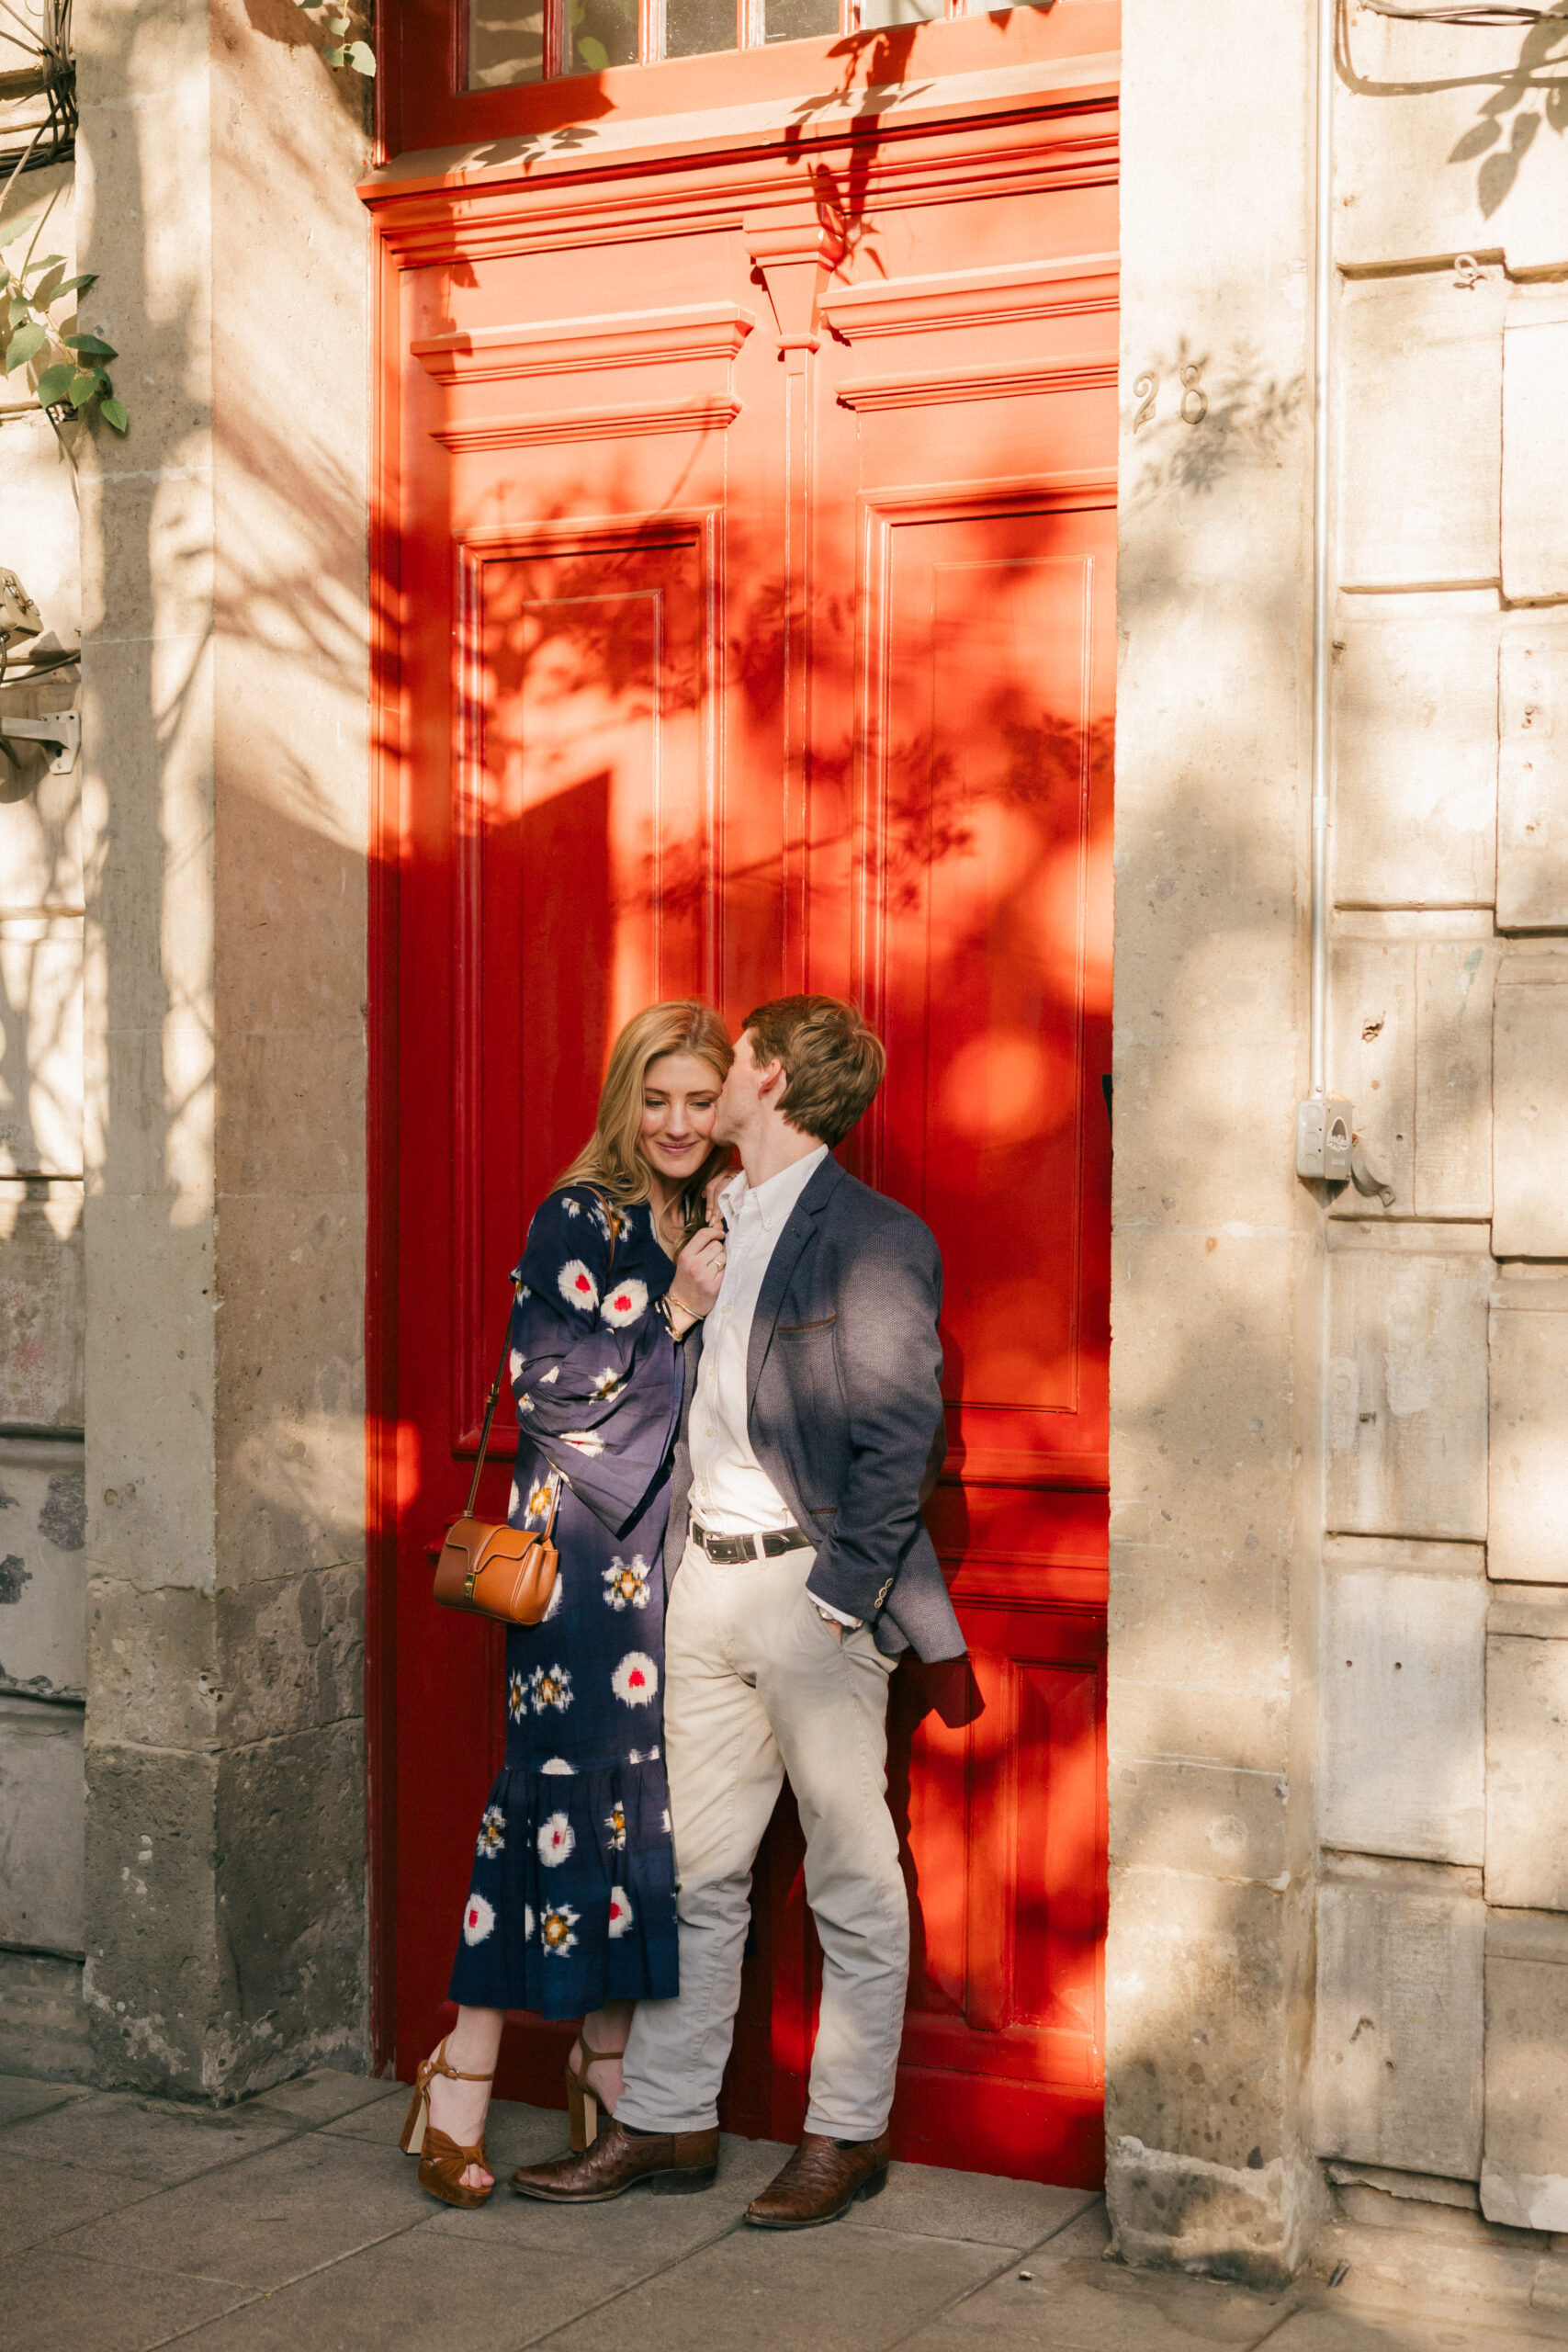 Stunning couple share a kiss on the cheek in front of a red door in Mexico City